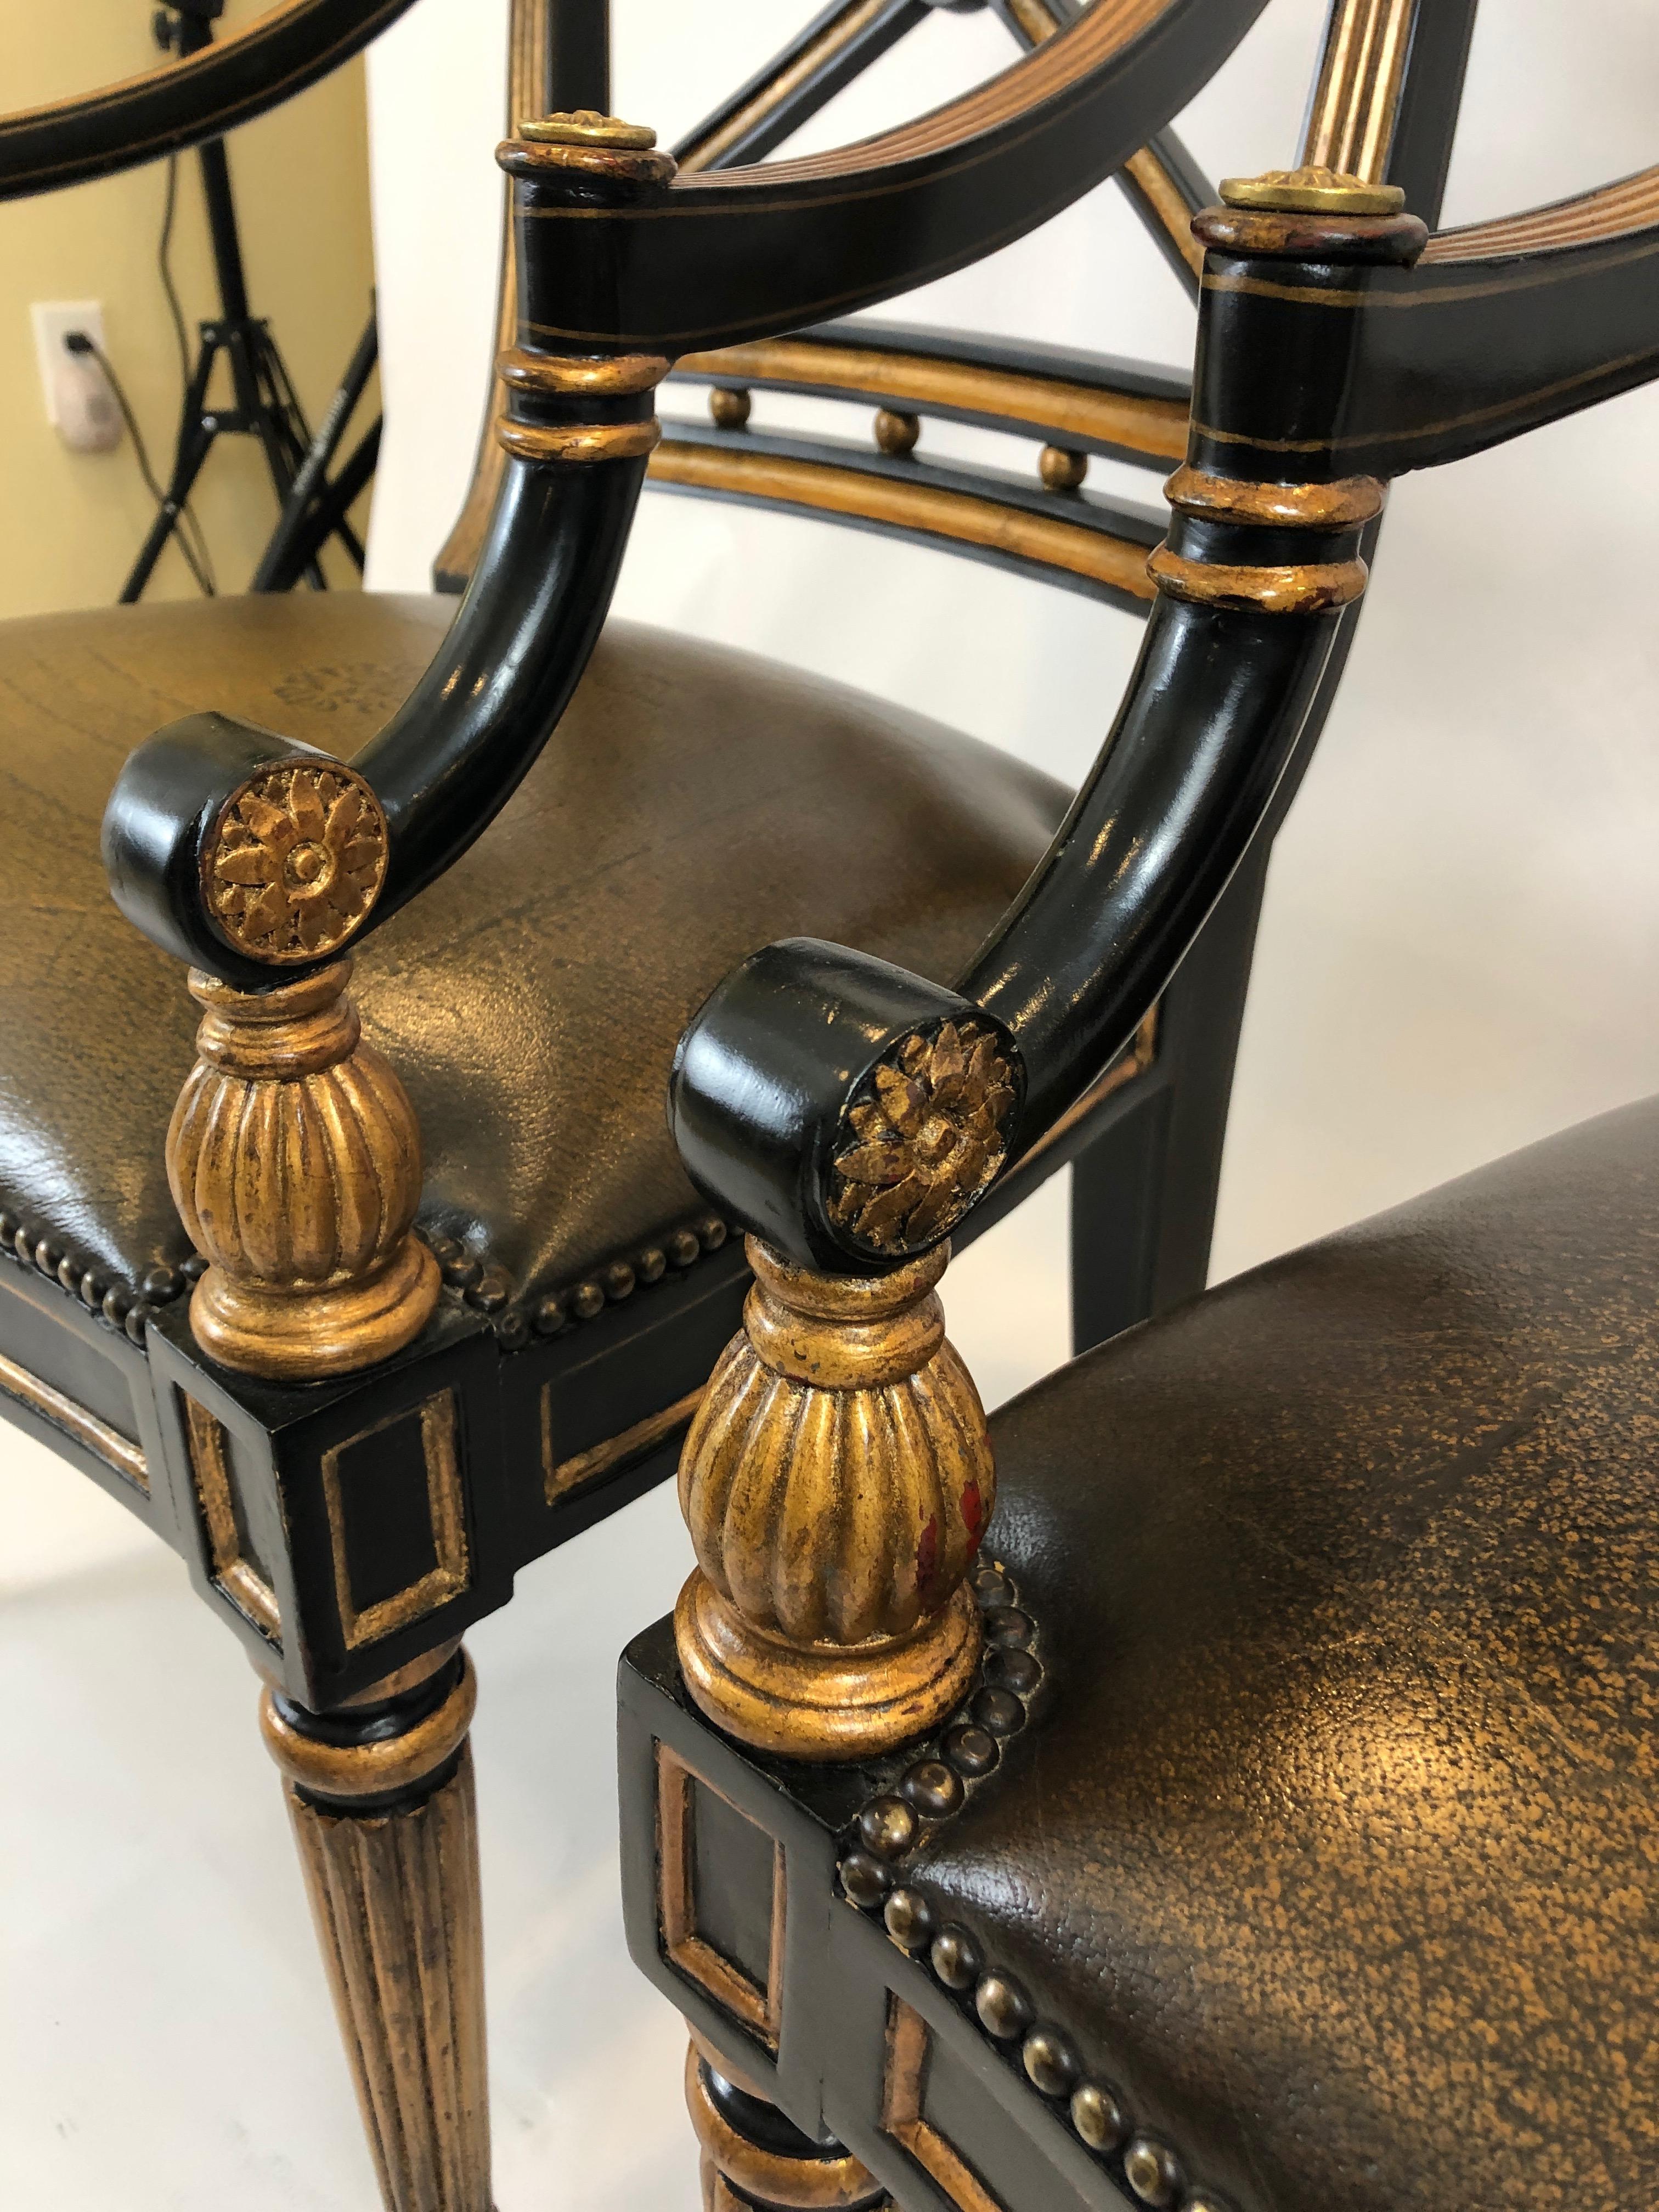 Glamorous pair of Regency style black and gold armchairs having wonderful X-style backs, gilded decorations including center rosettes and carved balls at the arms. Sumptuous embossed leather seats add to the luxury of these impressive